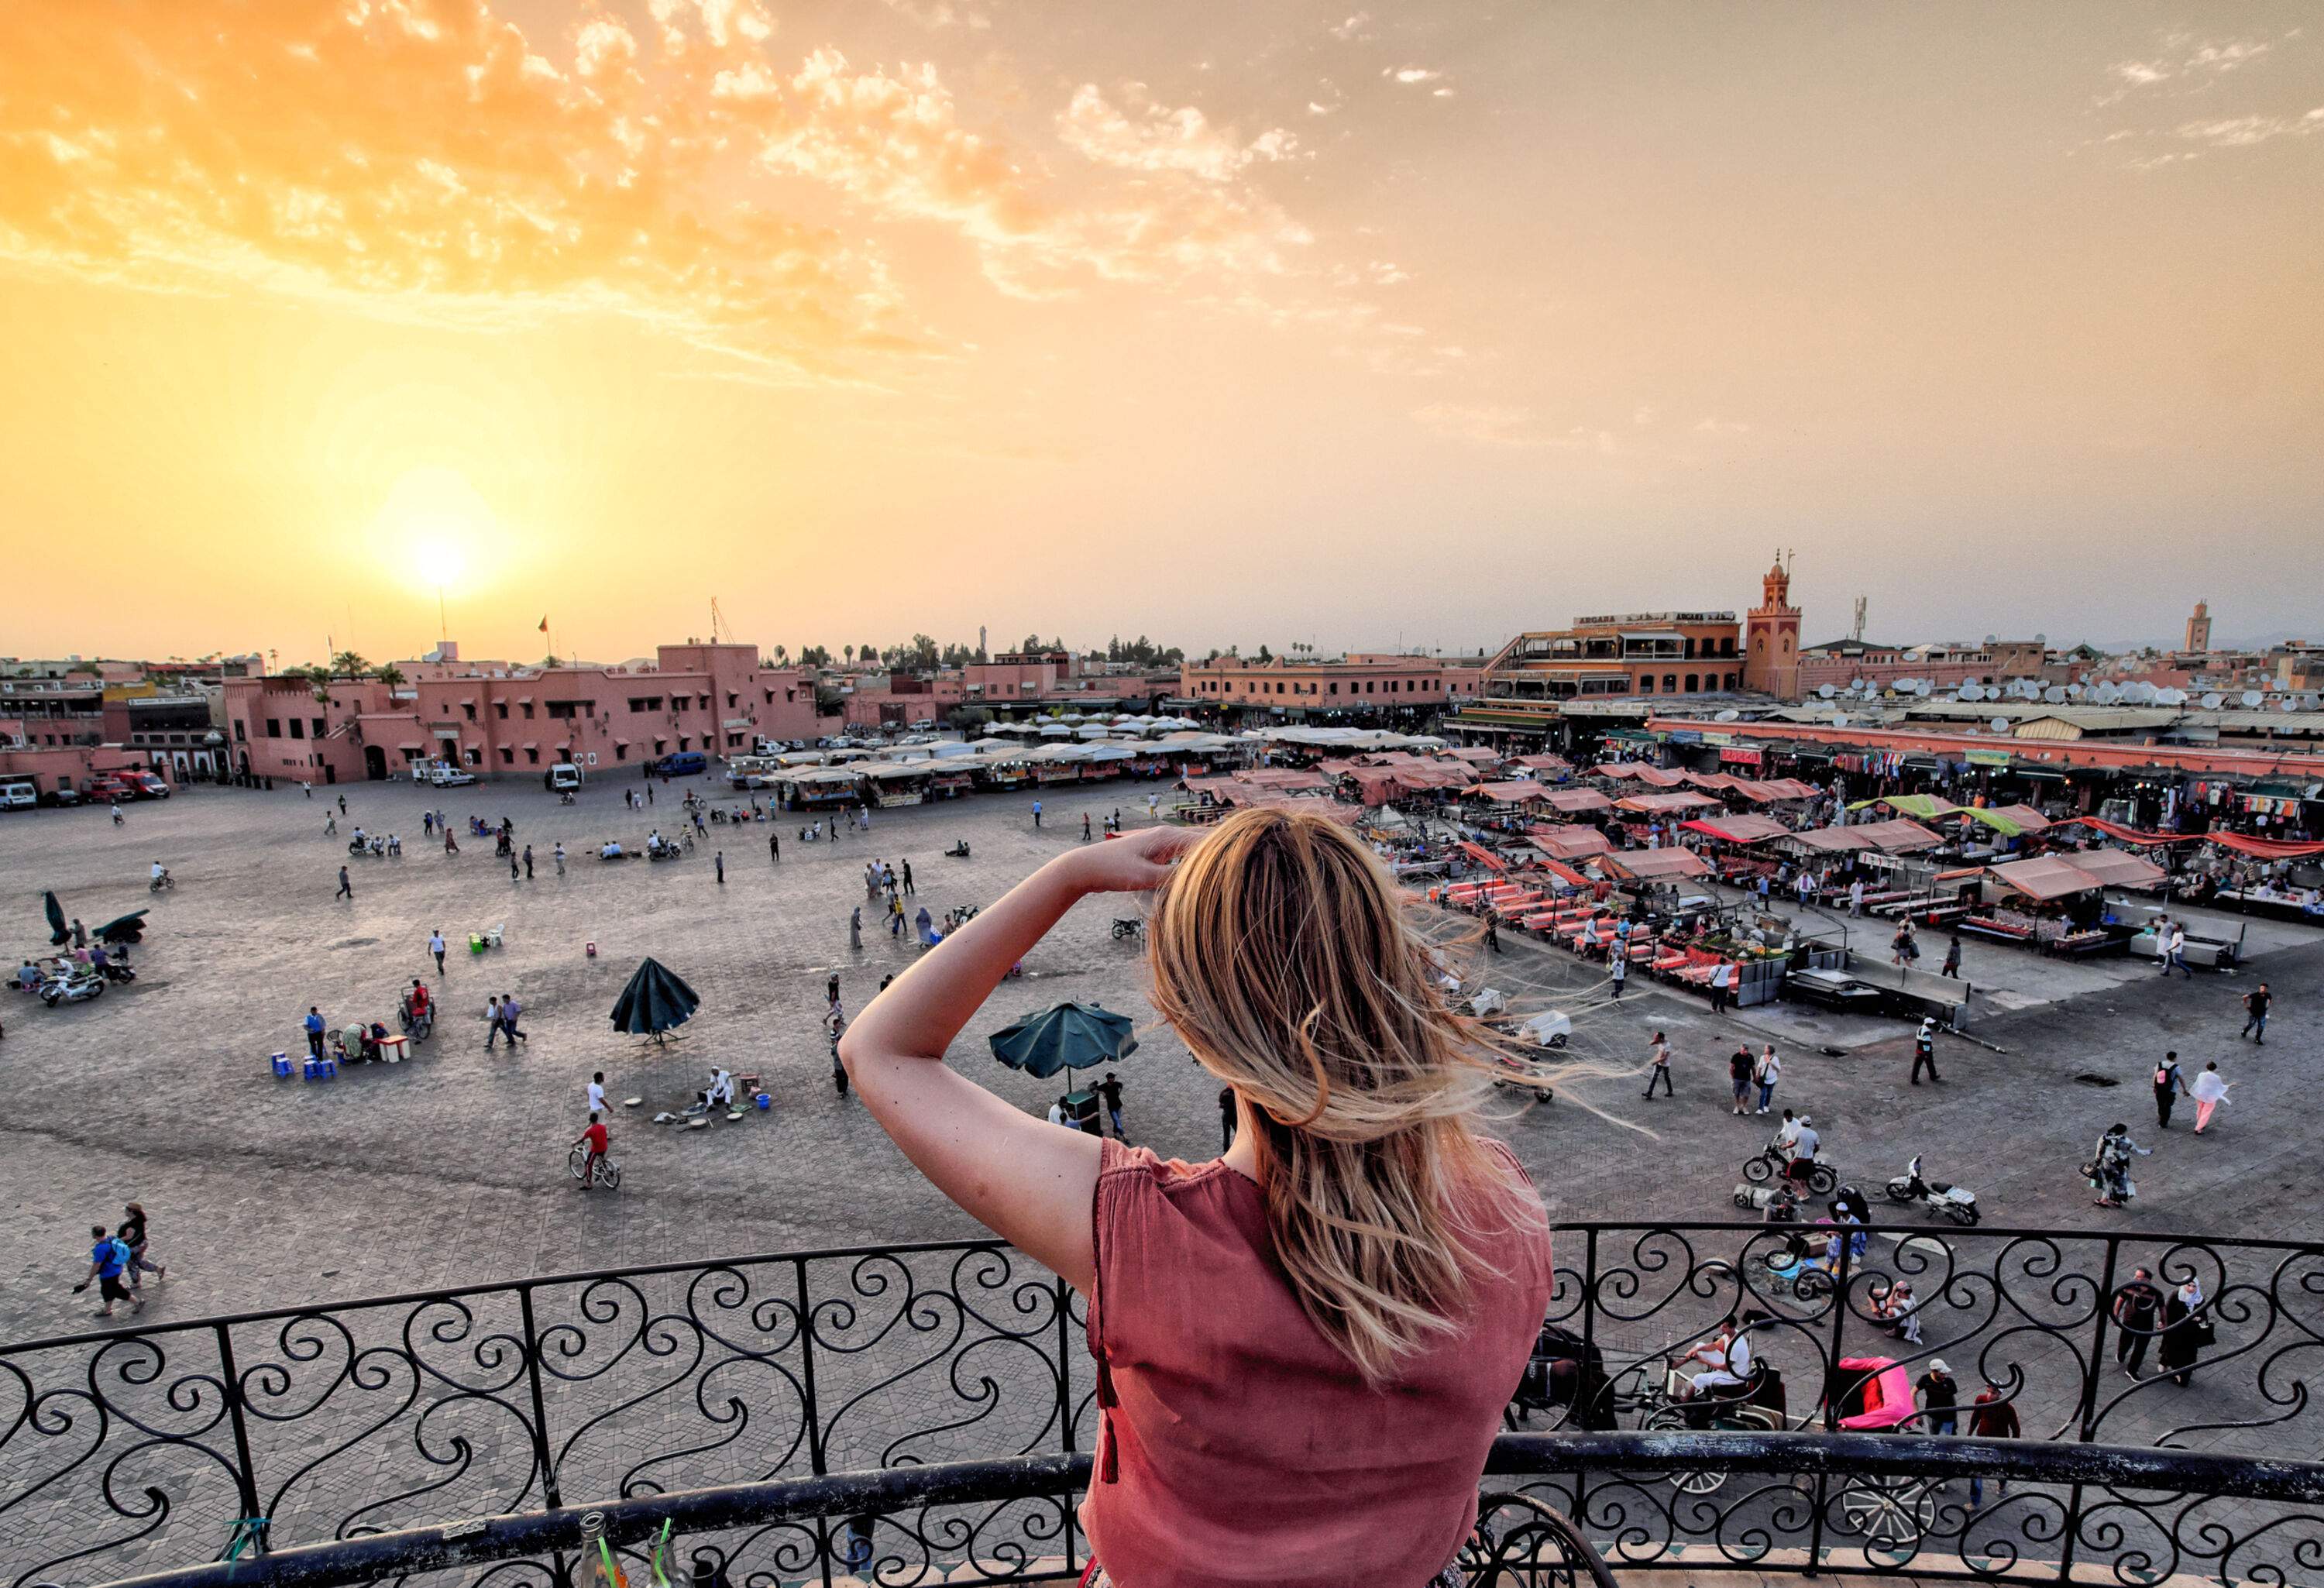 A woman stands on a terrace with overlooking views of a crowded market in a public square under a beautiful sunset.